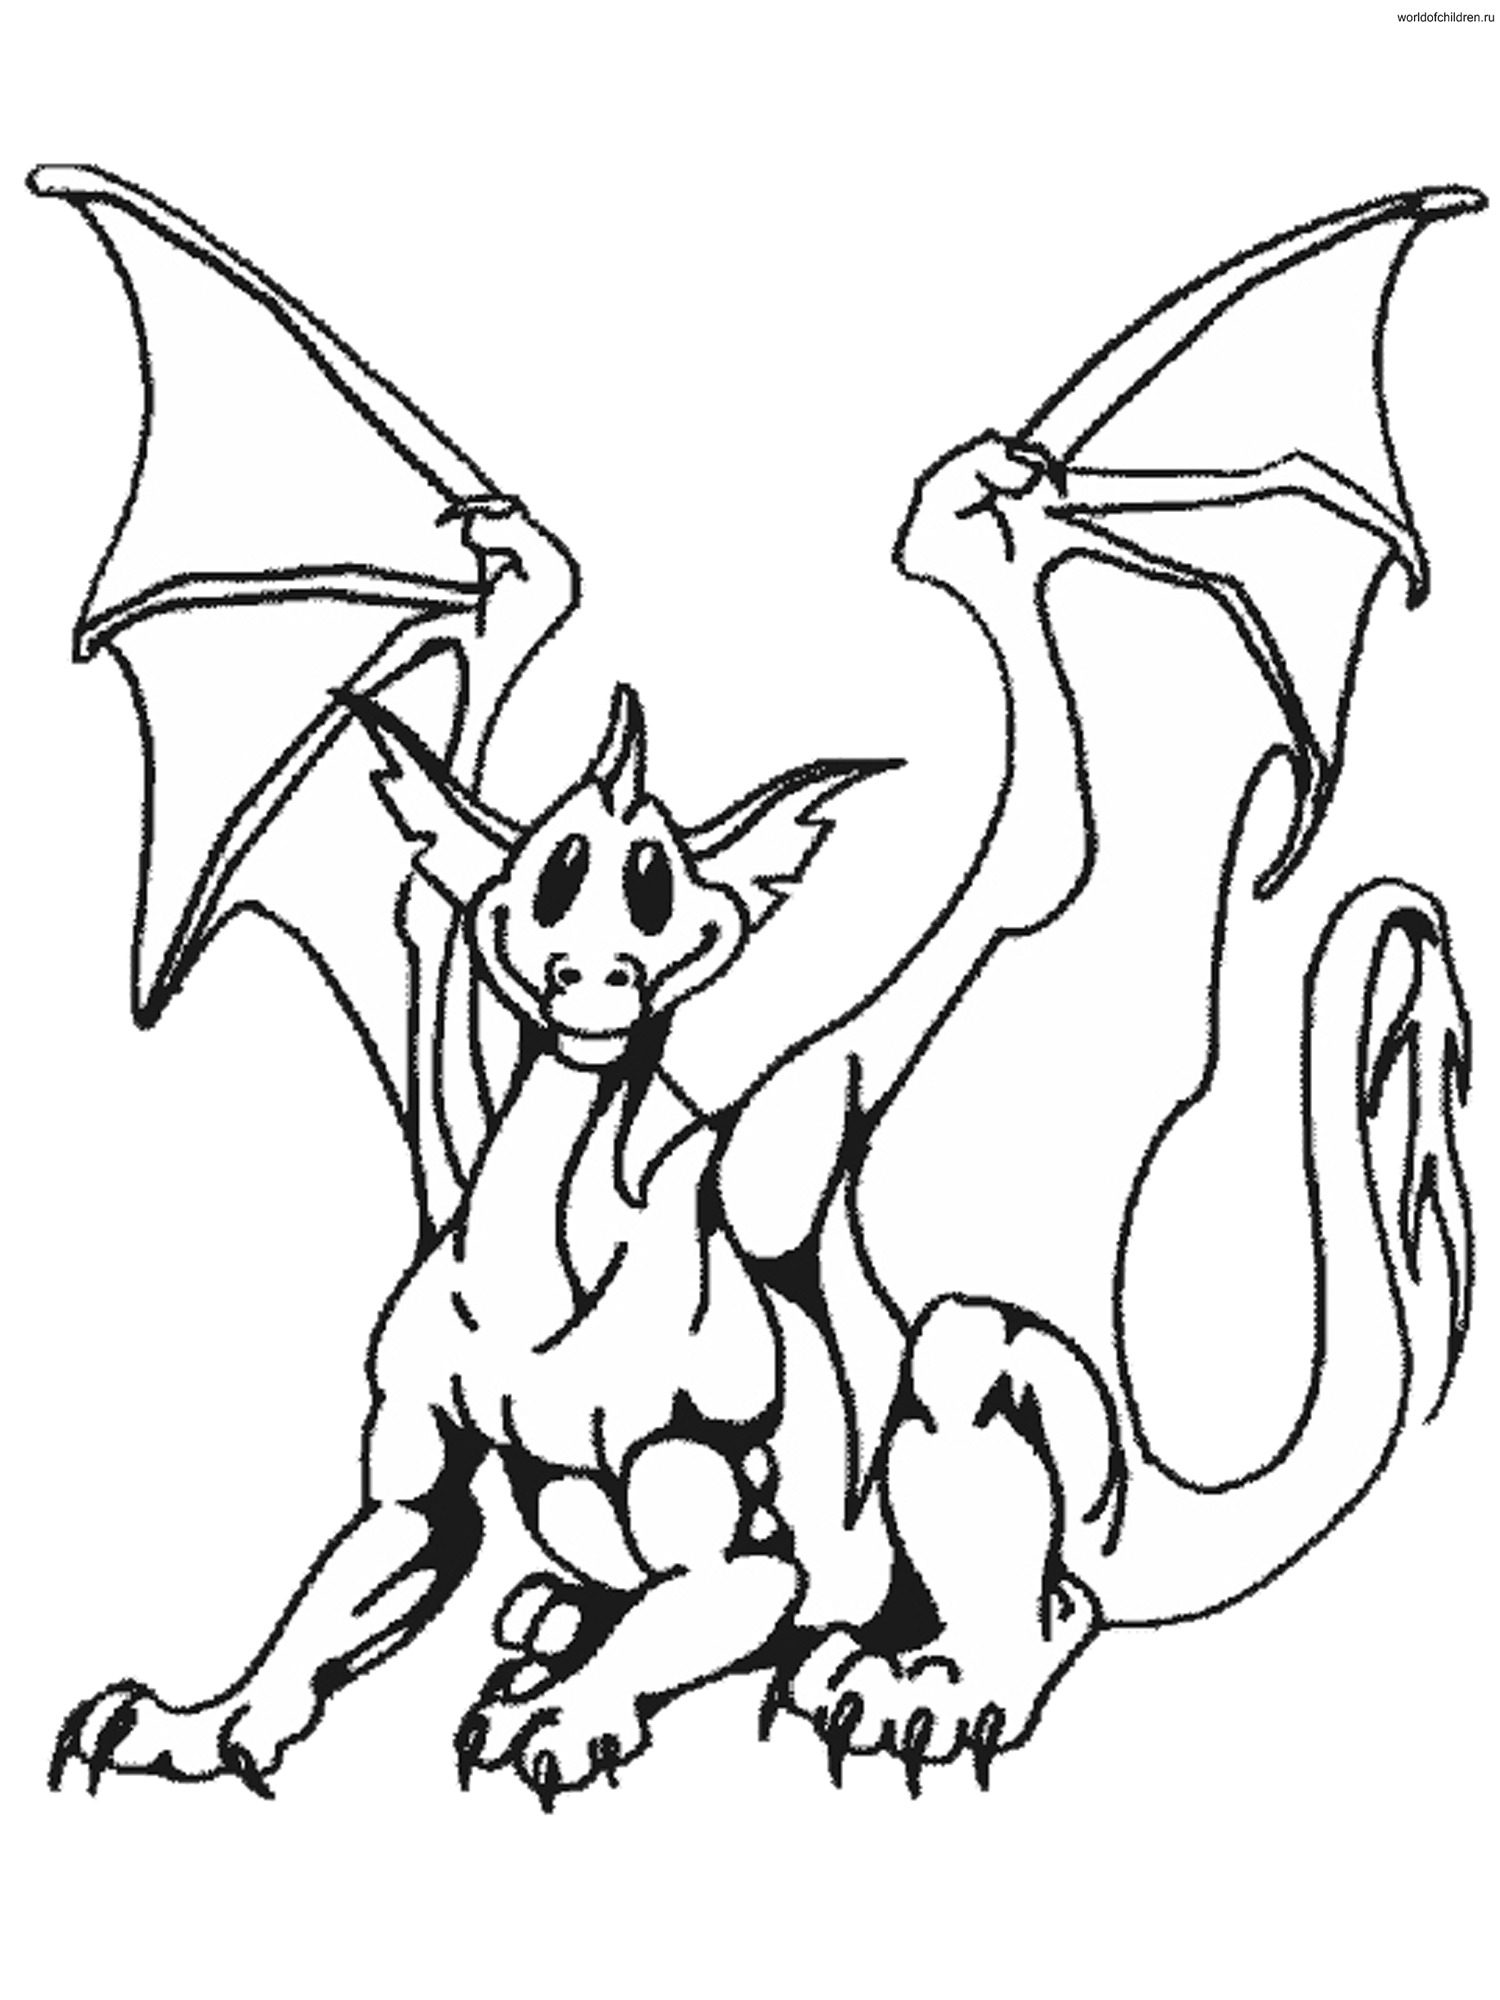 Dragons coloring pages 112 / Dragons / Kids printables coloring pages